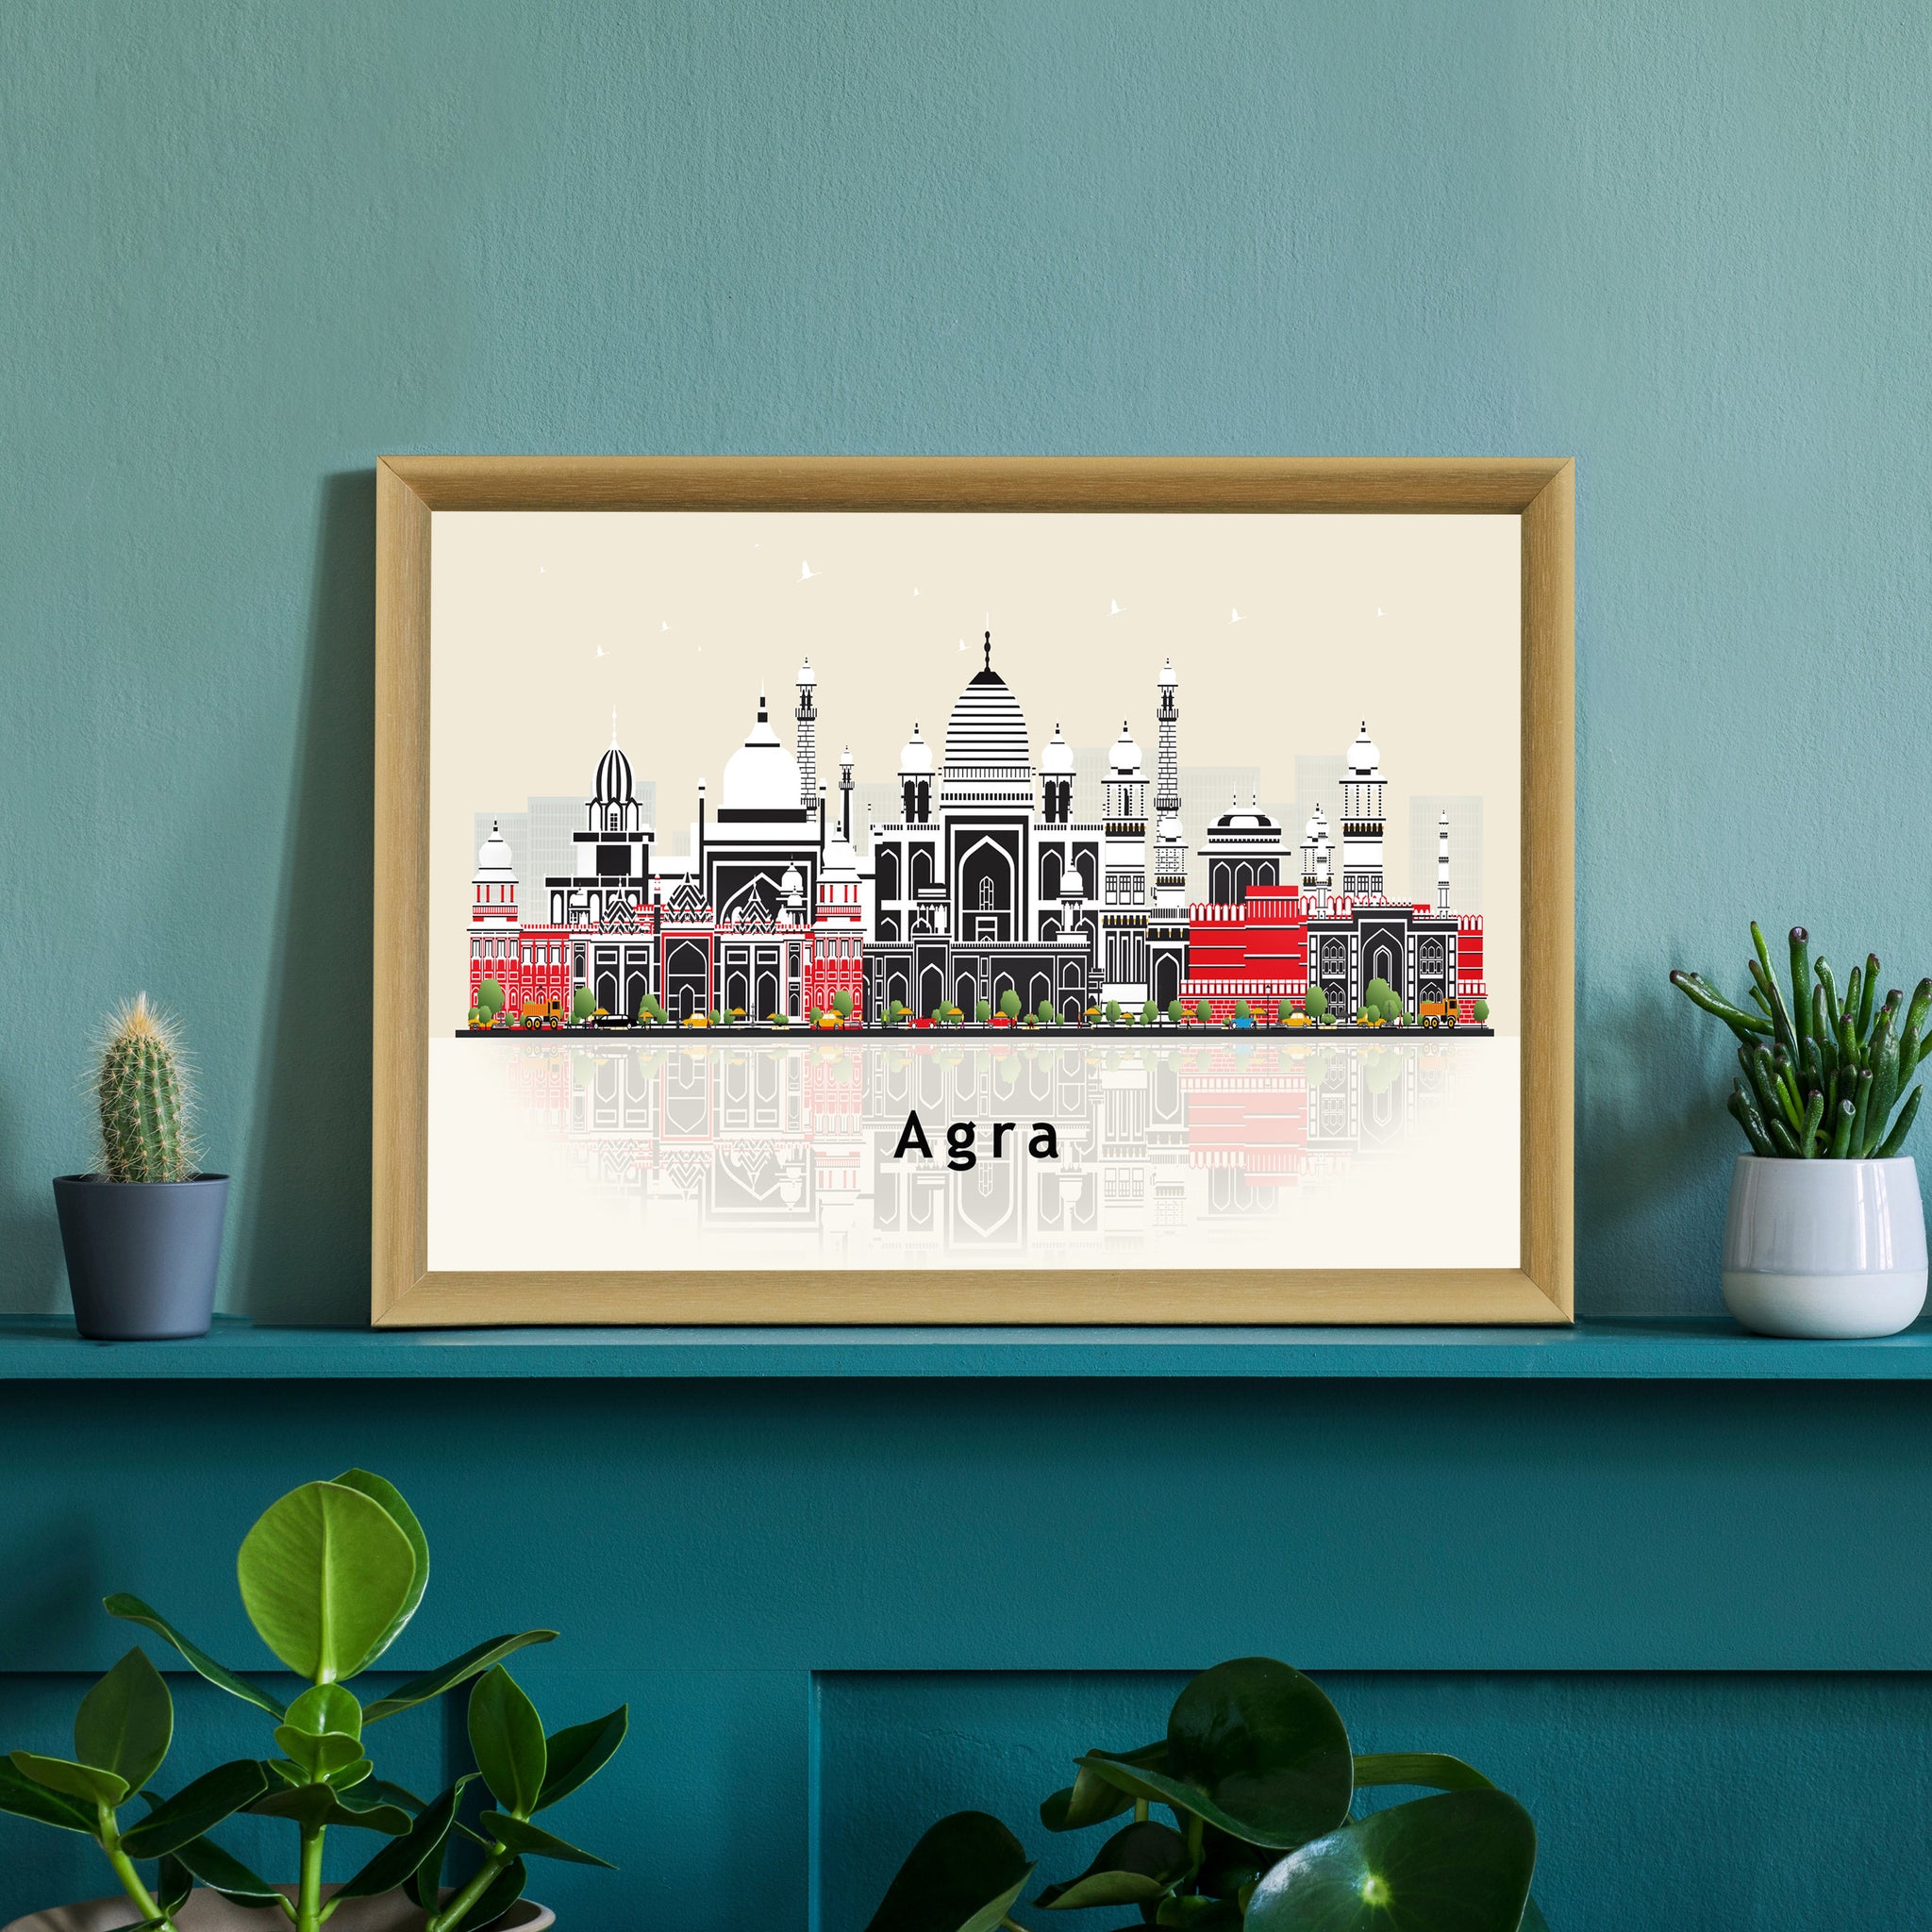 AGRA INDIA Illustration skyline poster, Modern skyline cityscape poster, Agra city India skyline landmark map poster, Home wall decoration